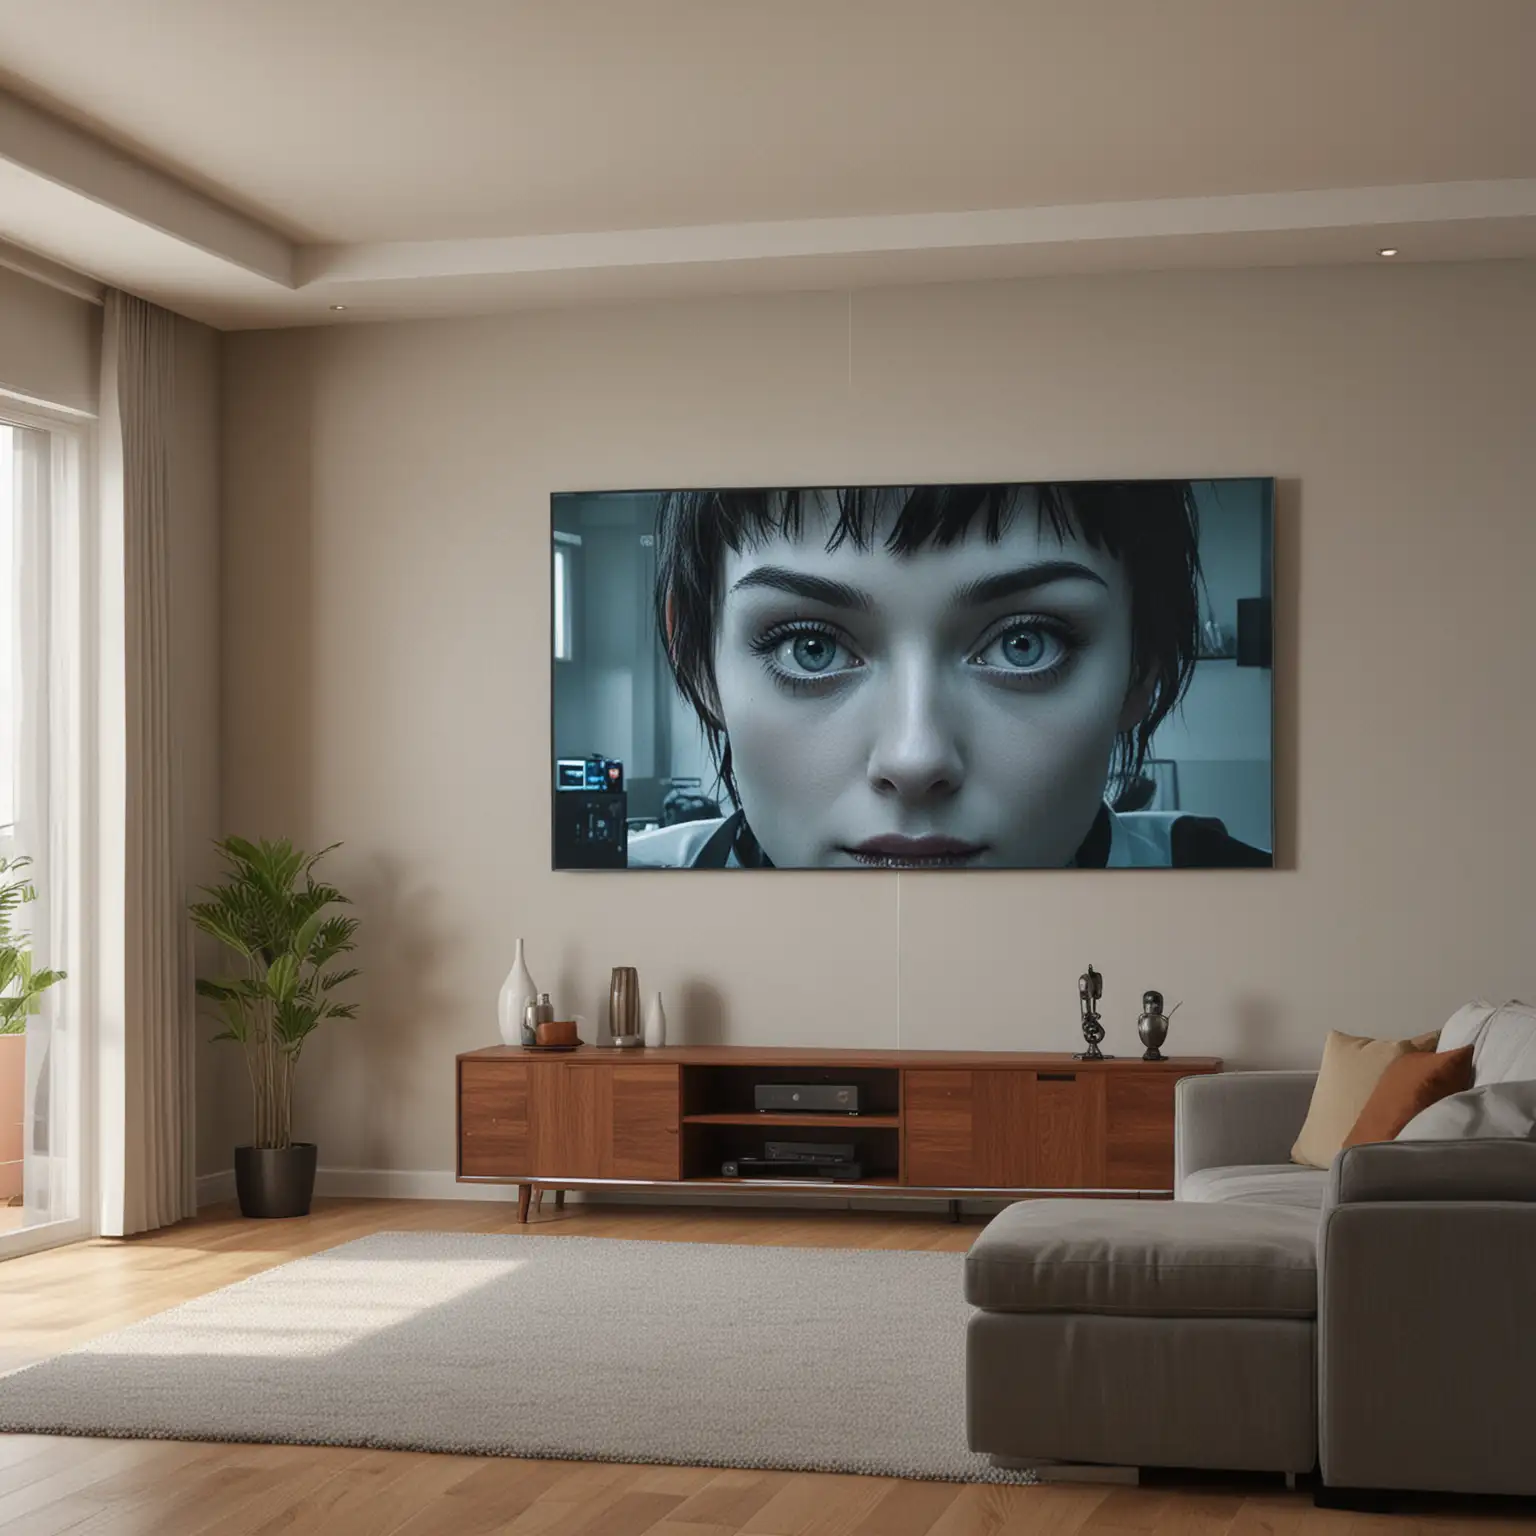 Futuristic Living Room with HumanRobot Interaction